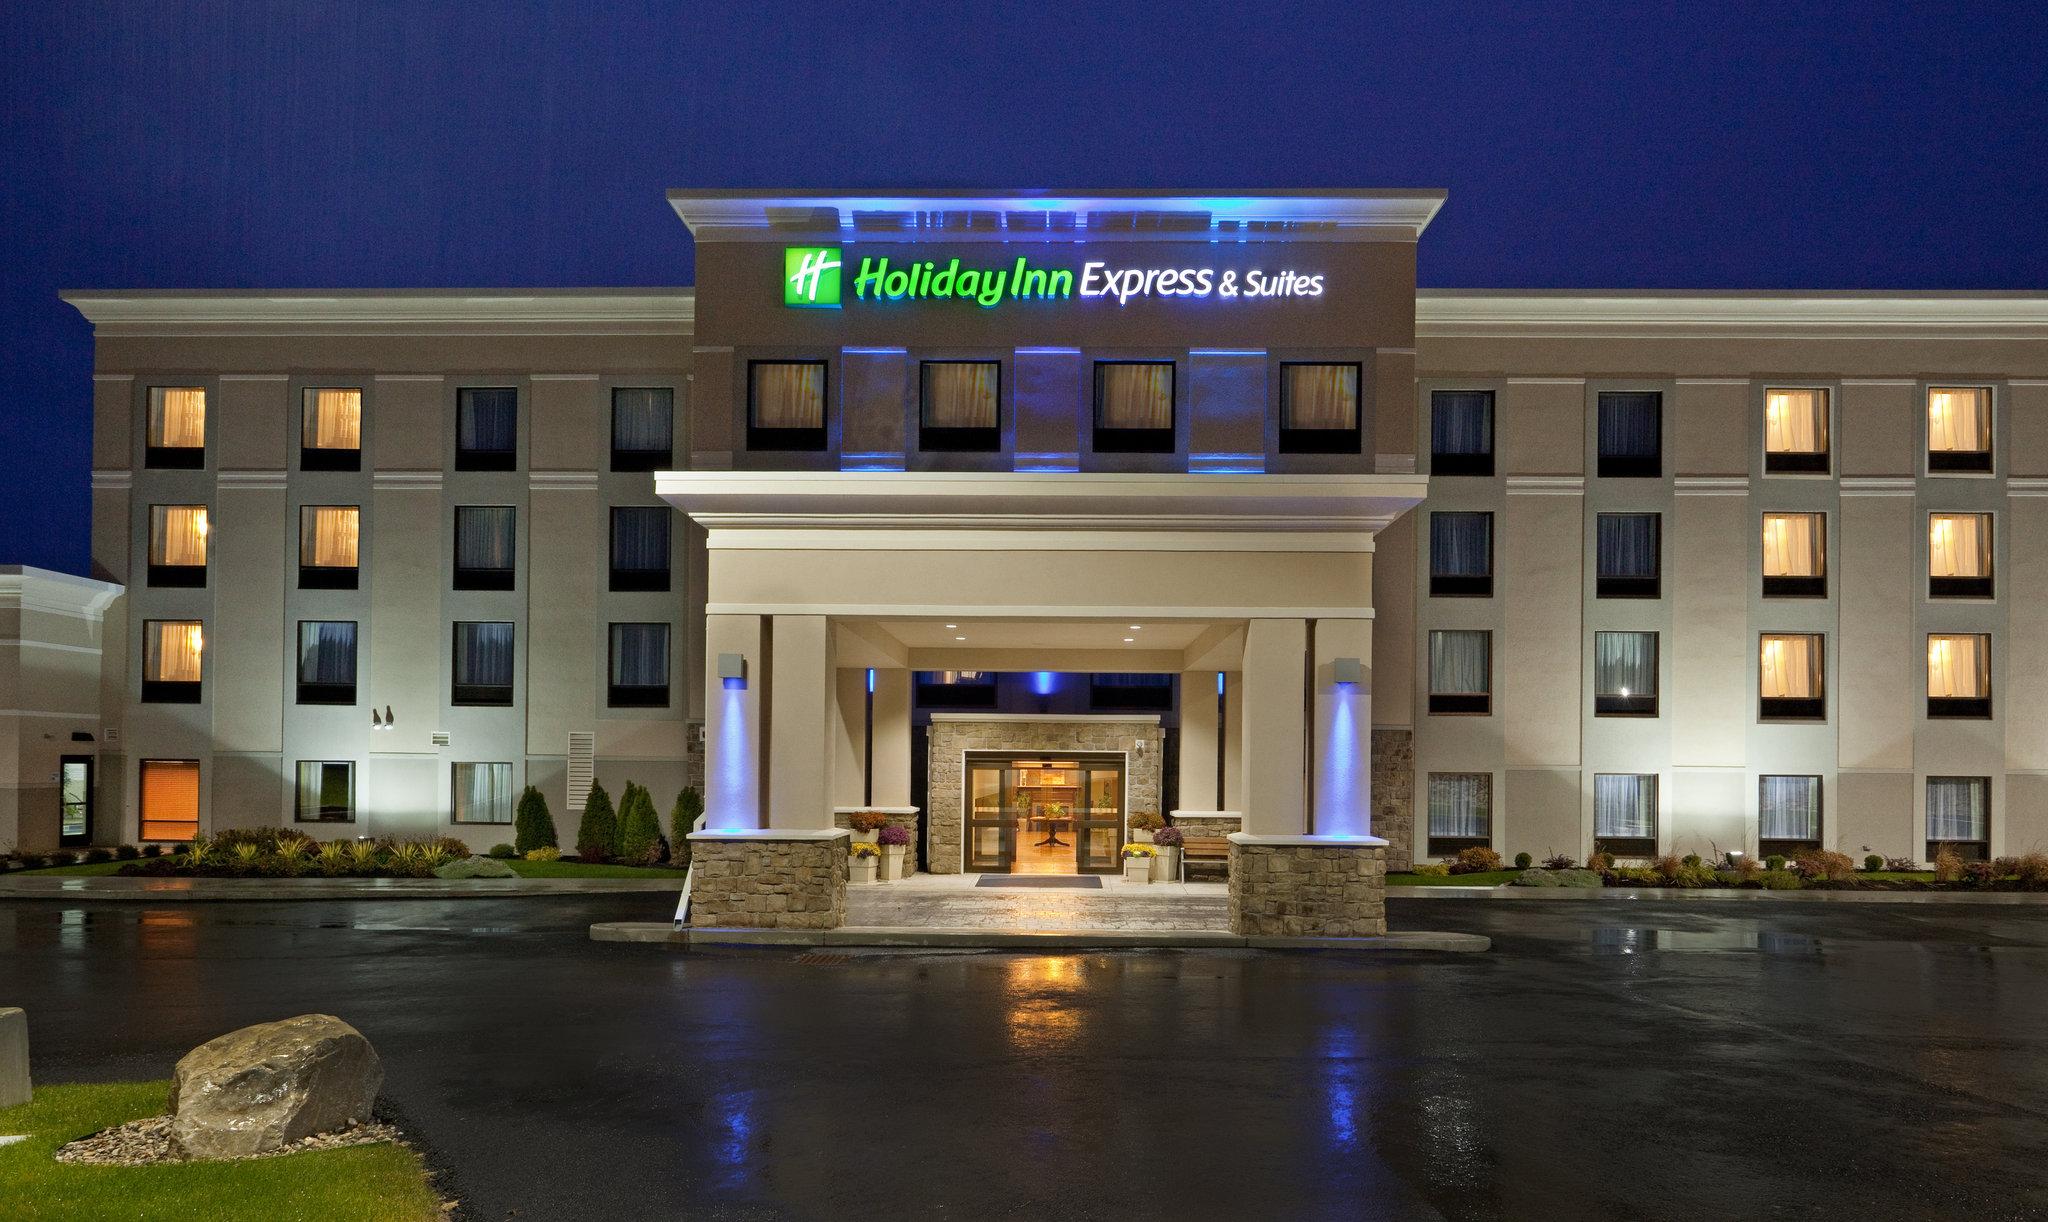 Holiday Inn Express Hotel & Suites Malone in Malone, NY